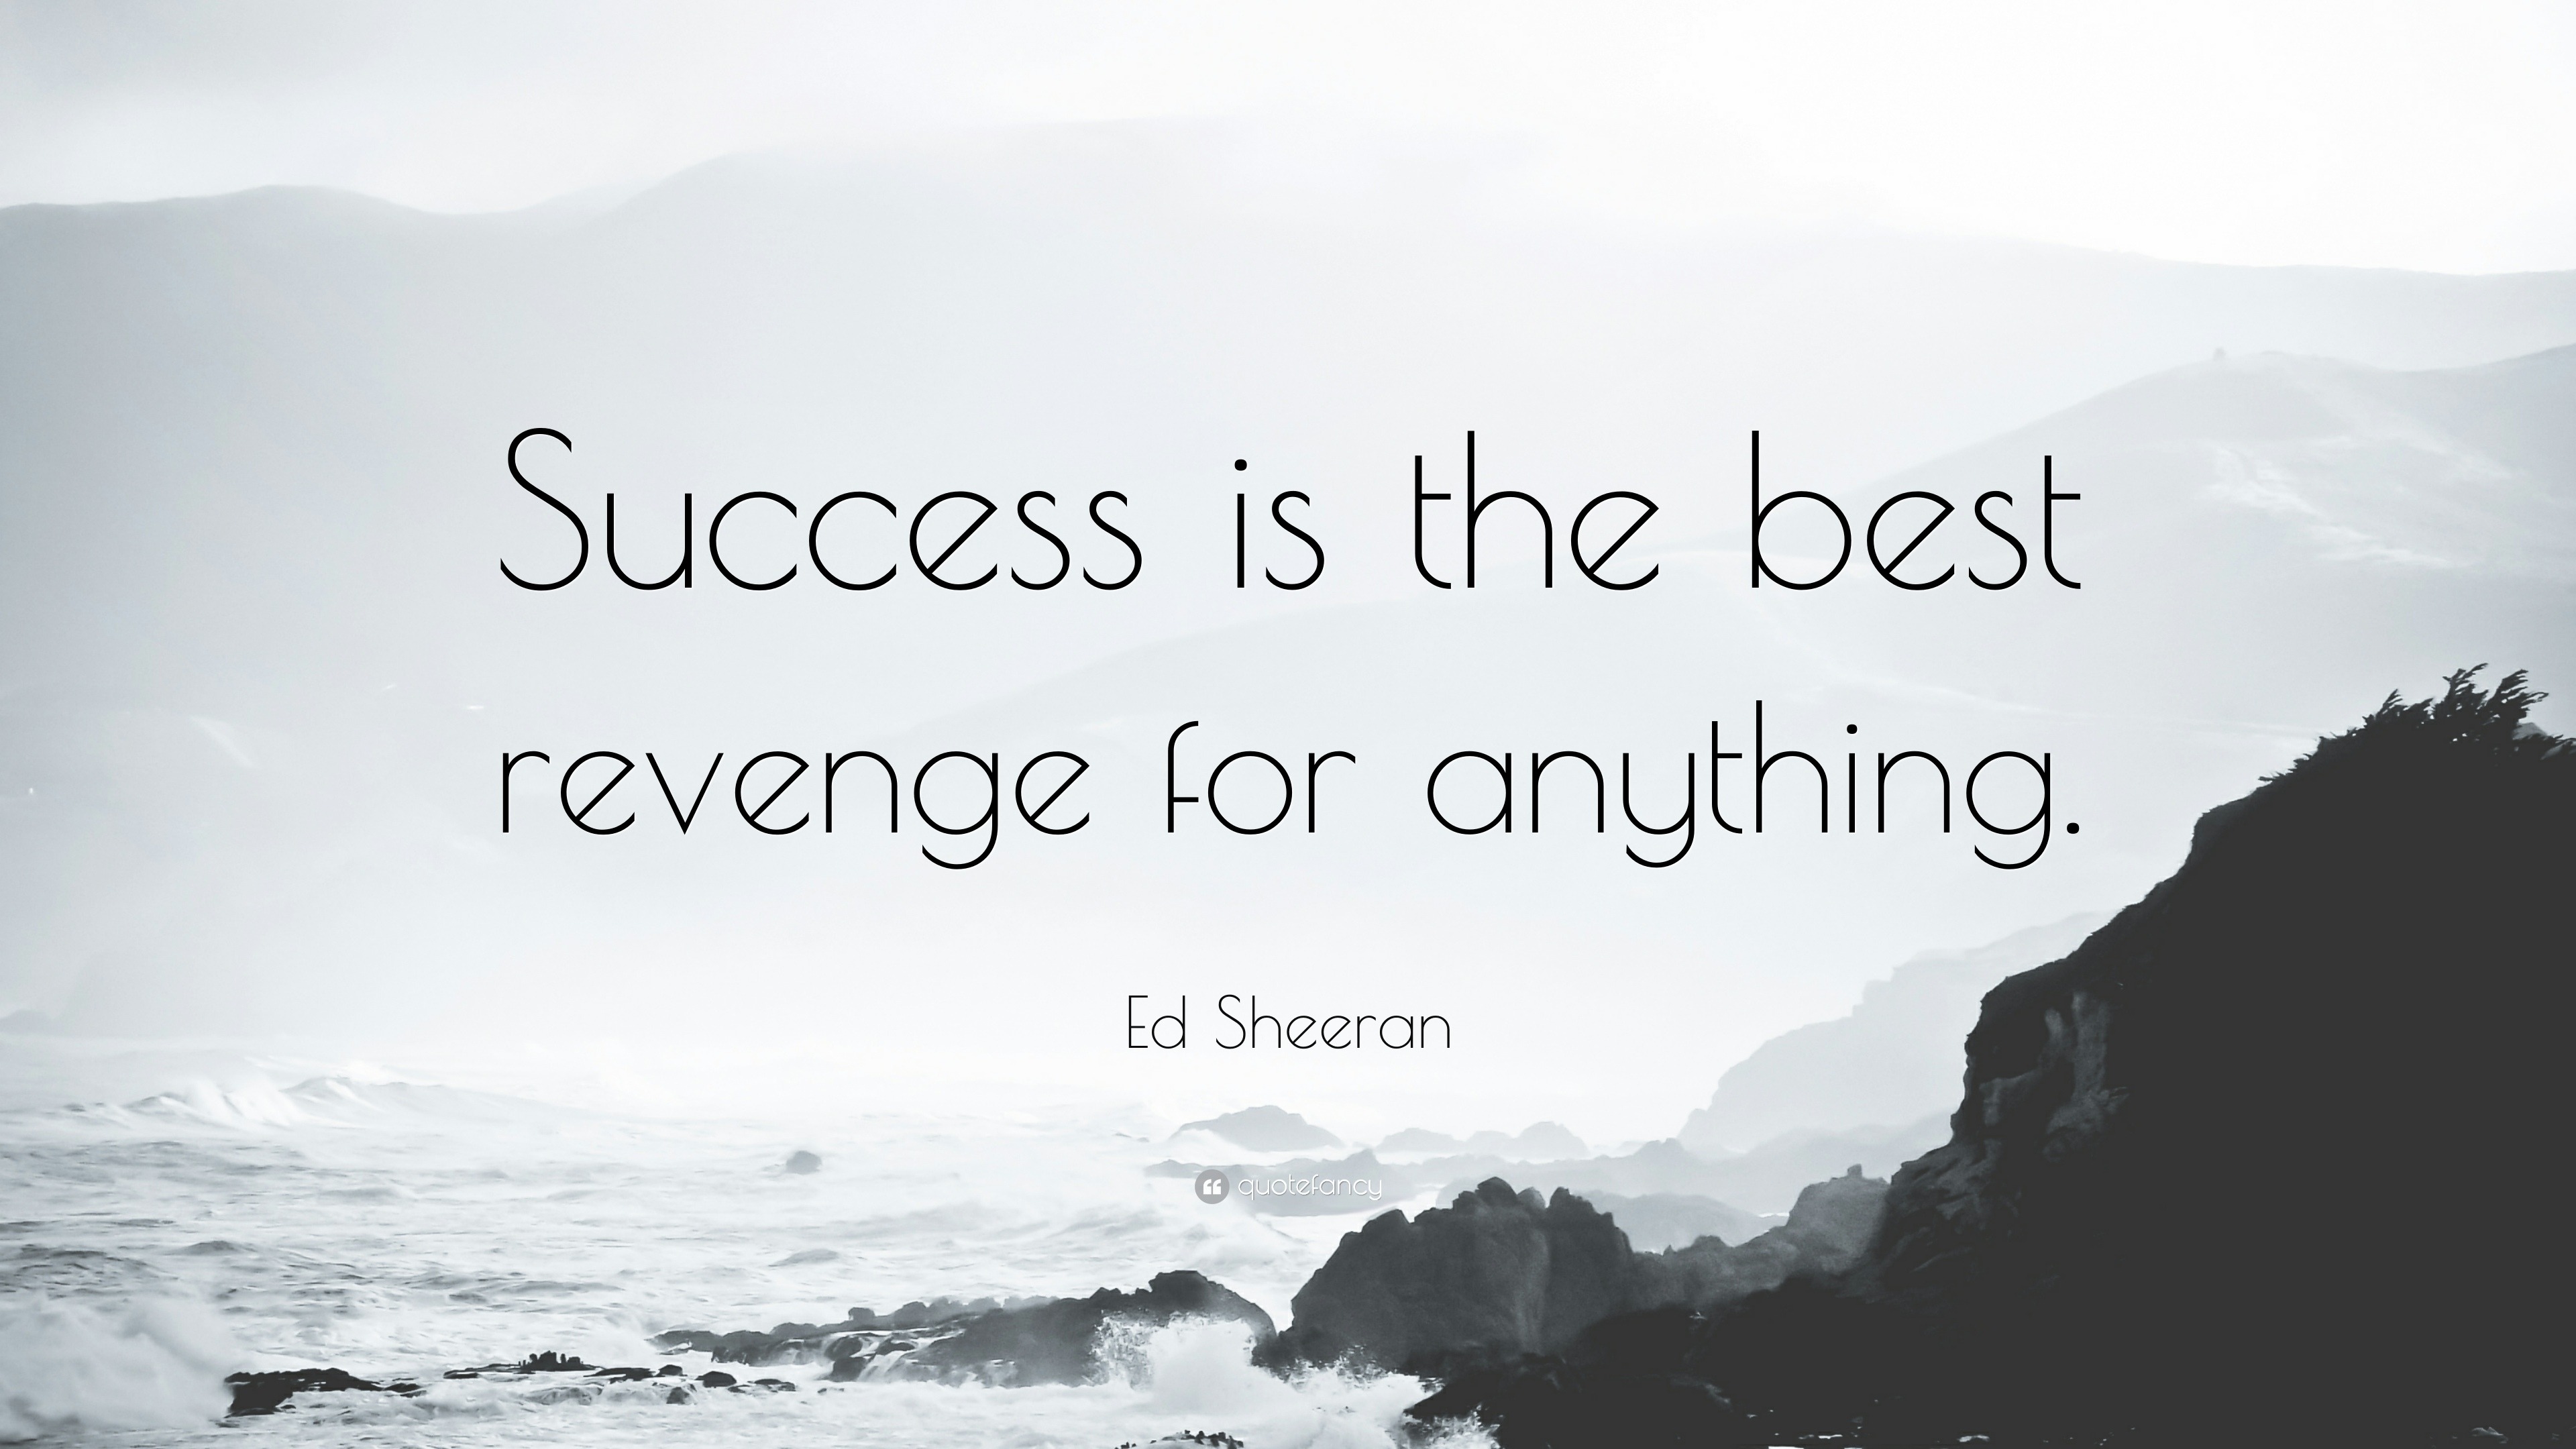 Ed Sheeran The A Team Quotes for kids